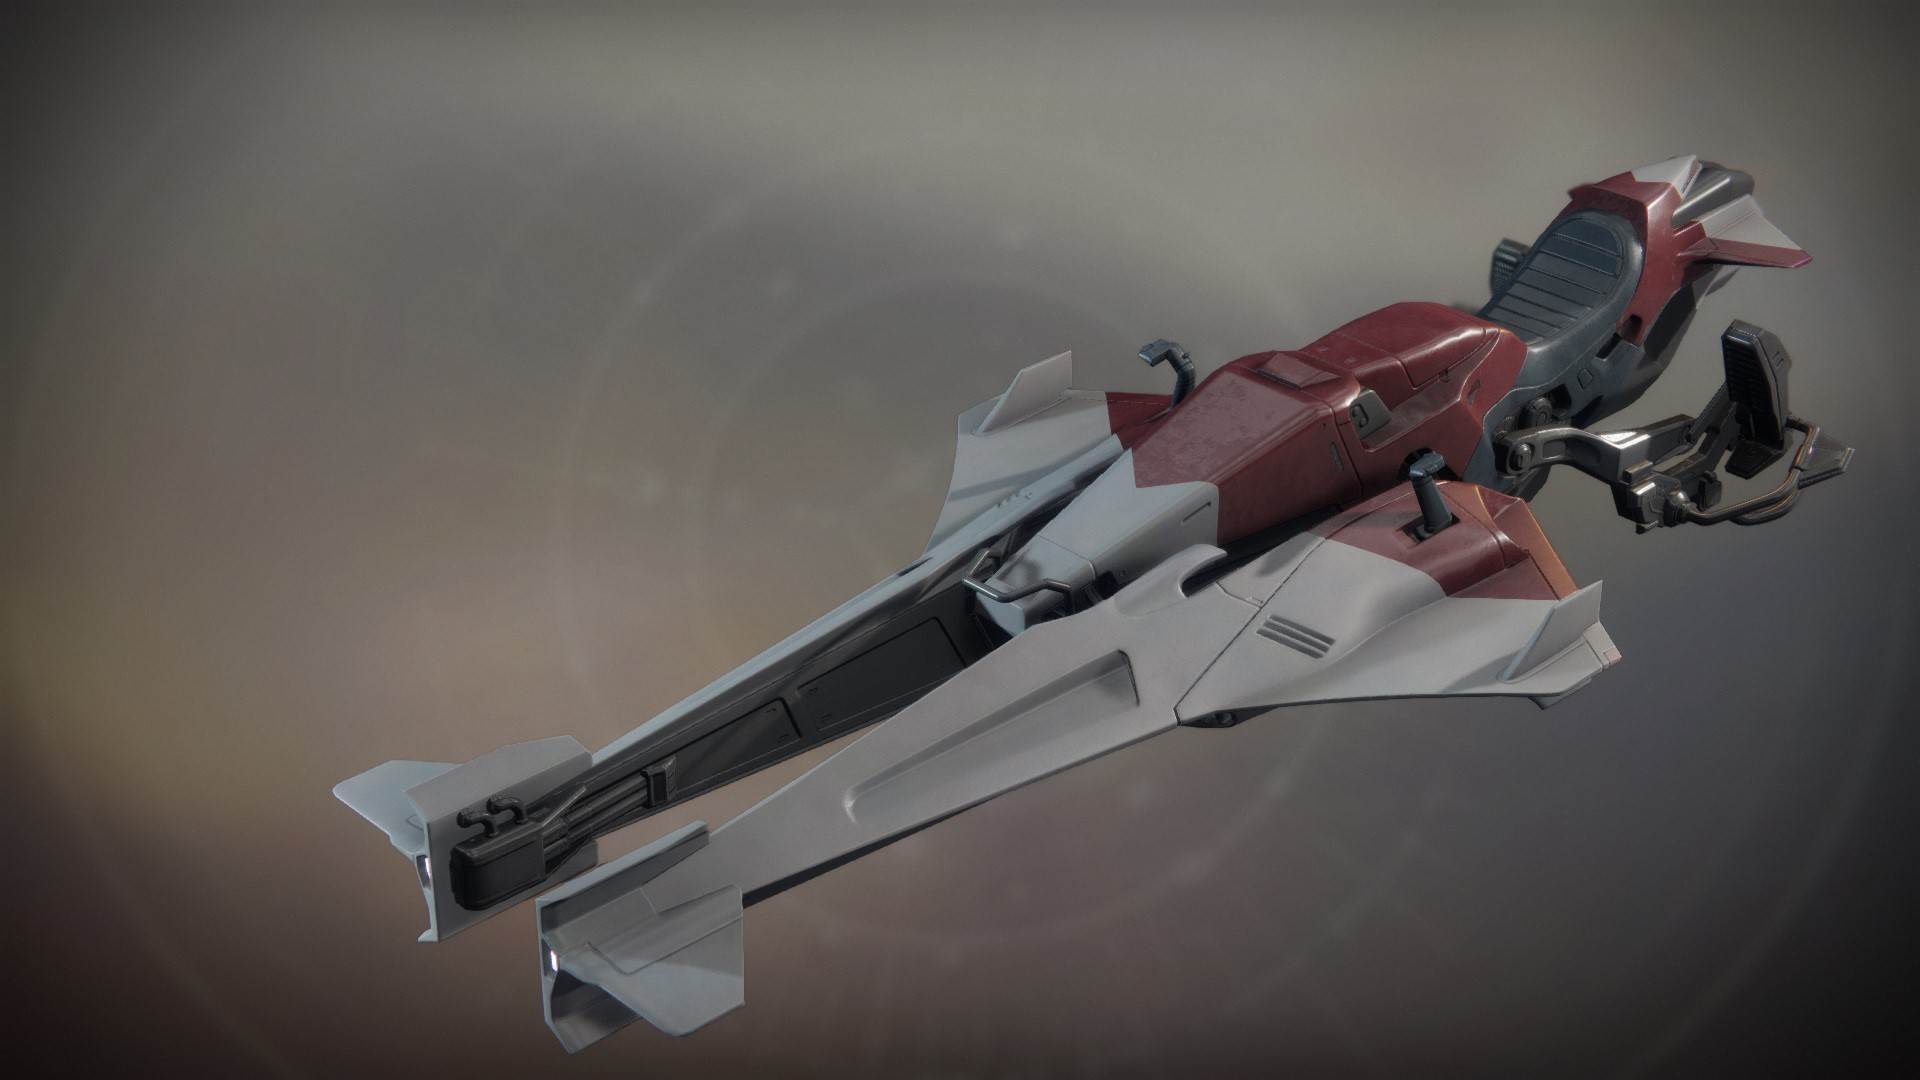 An in-game render of the Hyperion.